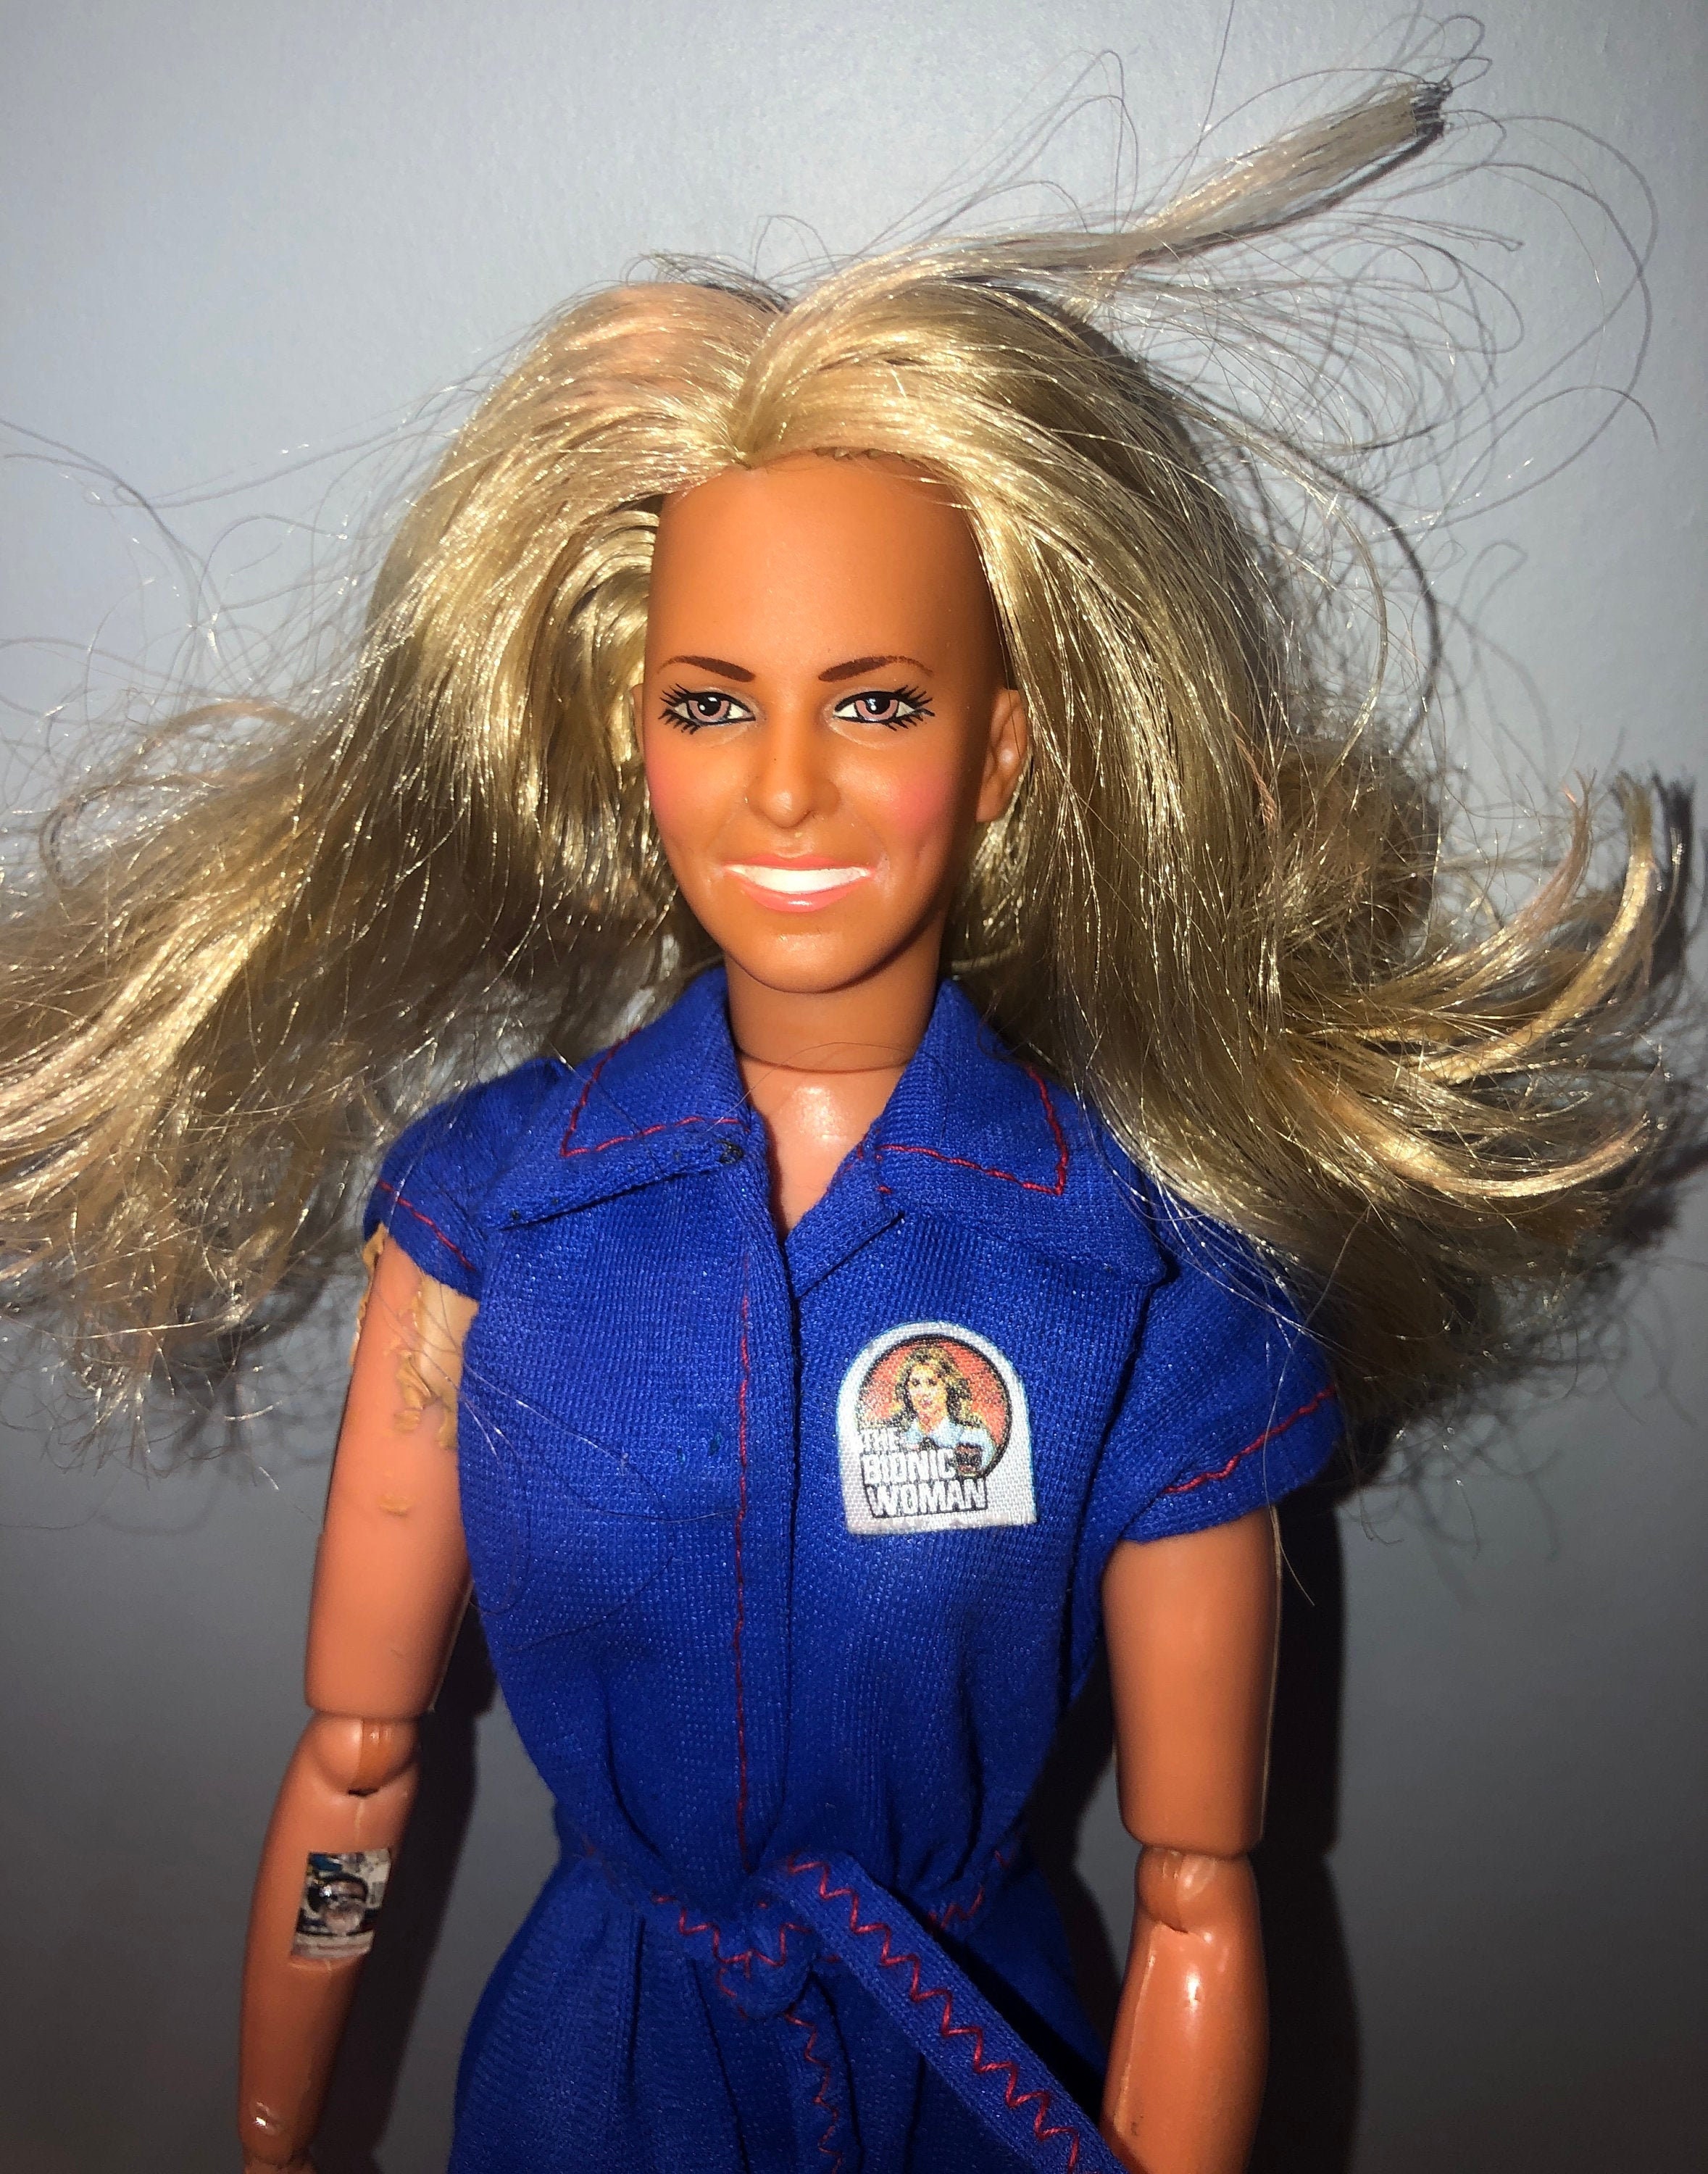 The Bionic Woman Vintage Barbie Doll 1970s 1980s Lindsay Wagner -   Canada